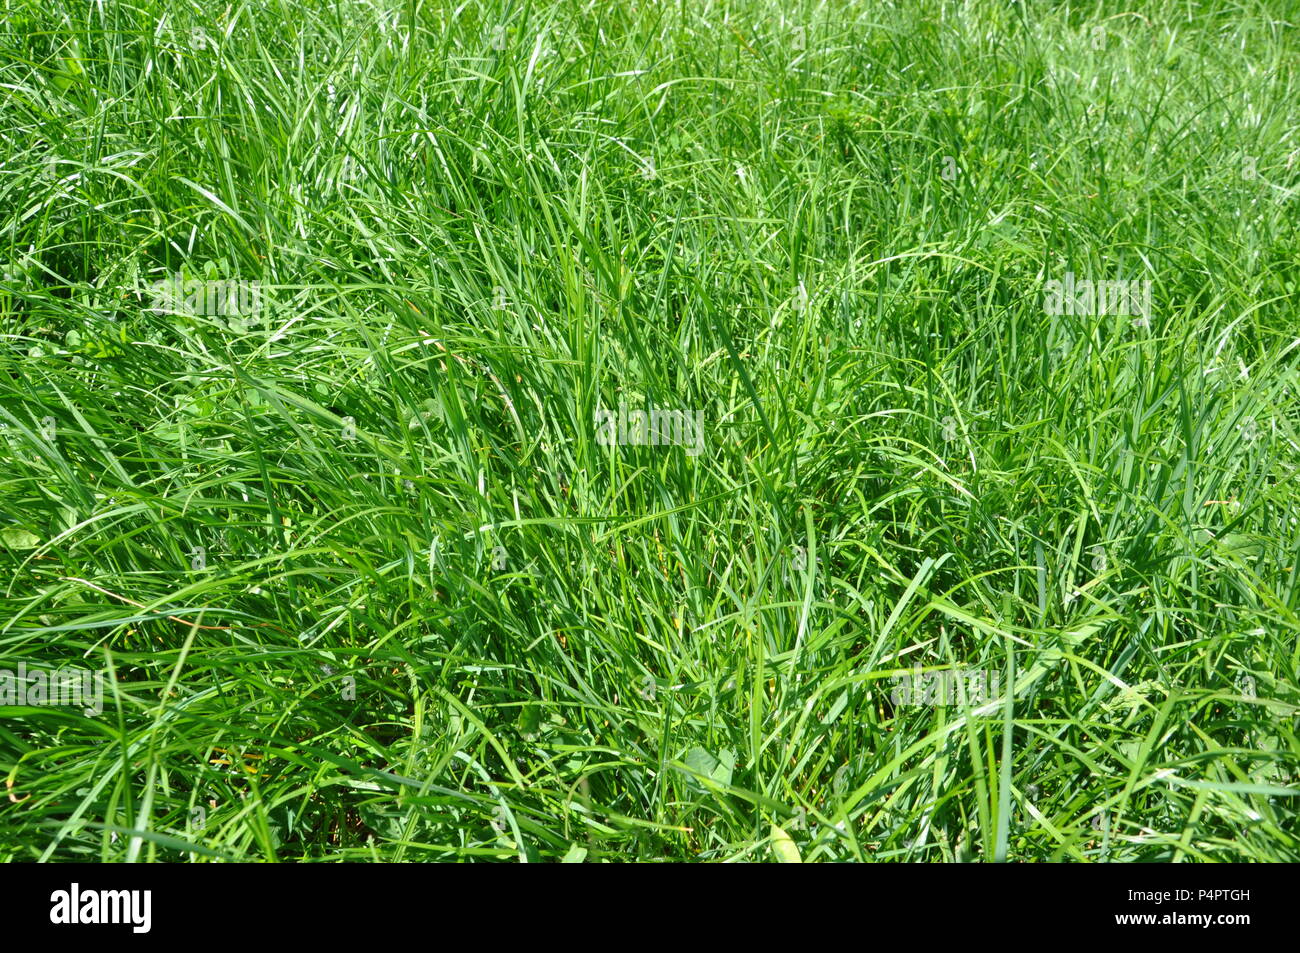 Green grass backdground, top side view Stock Photo